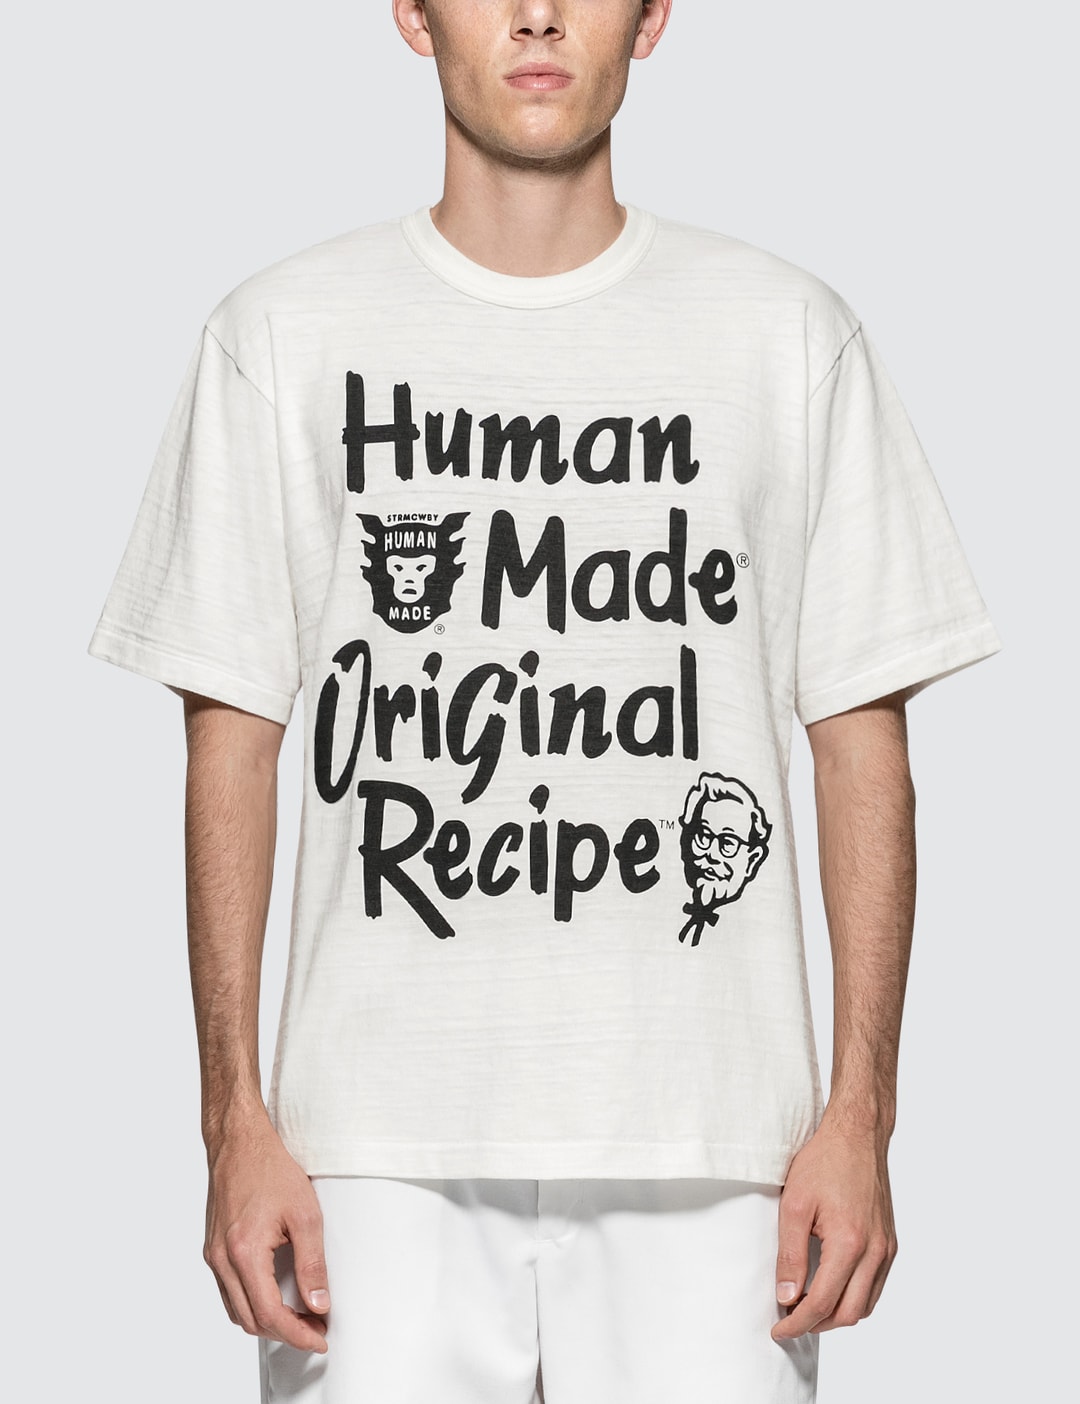 Human Made - Human Made x KFC Screened S/S T-Shirt  HBX - Globally Curated  Fashion and Lifestyle by Hypebeast